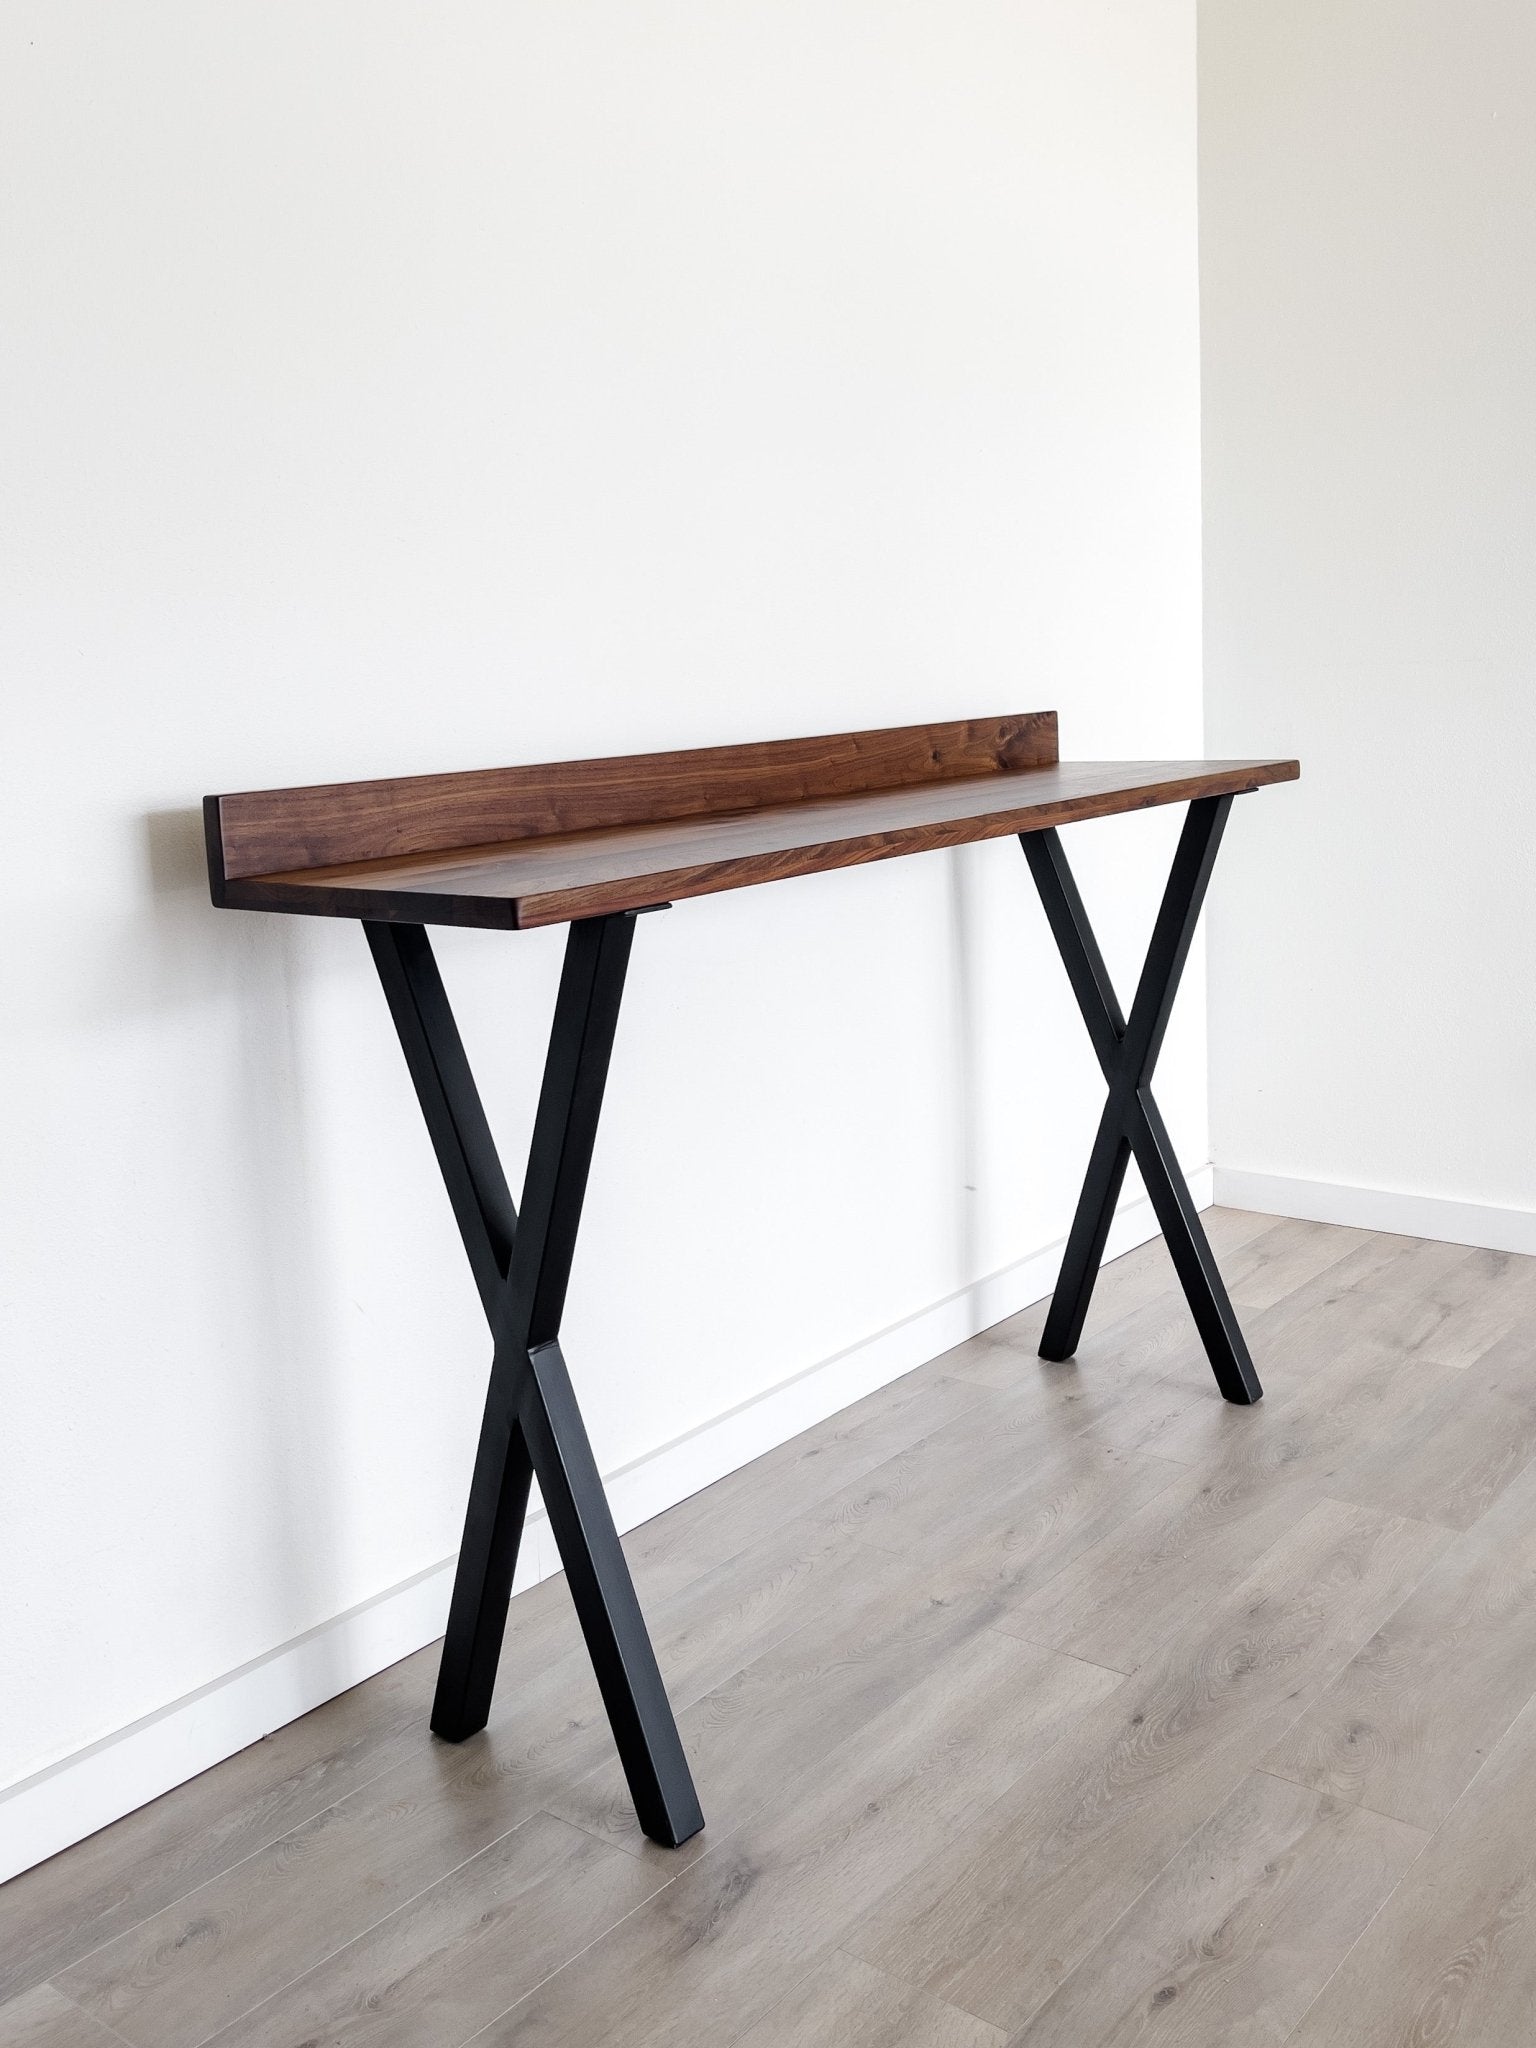 The Madison Sofa Table - FargoWoodworks